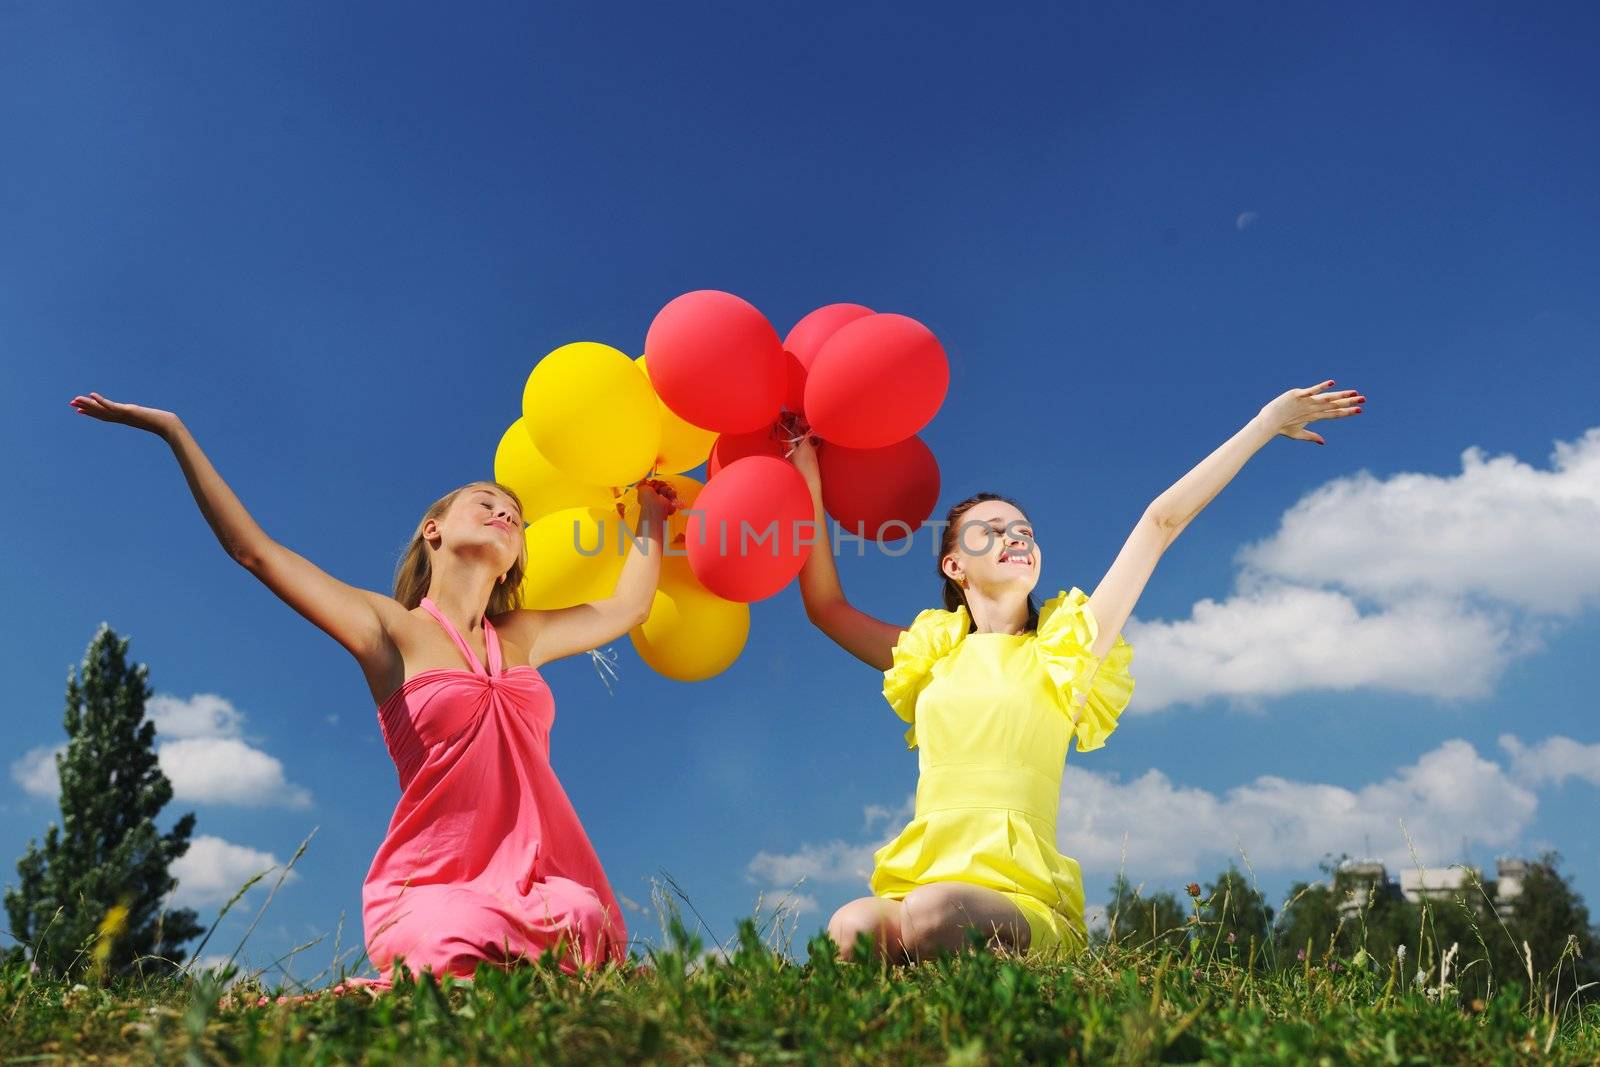 Girls with balloons by haveseen